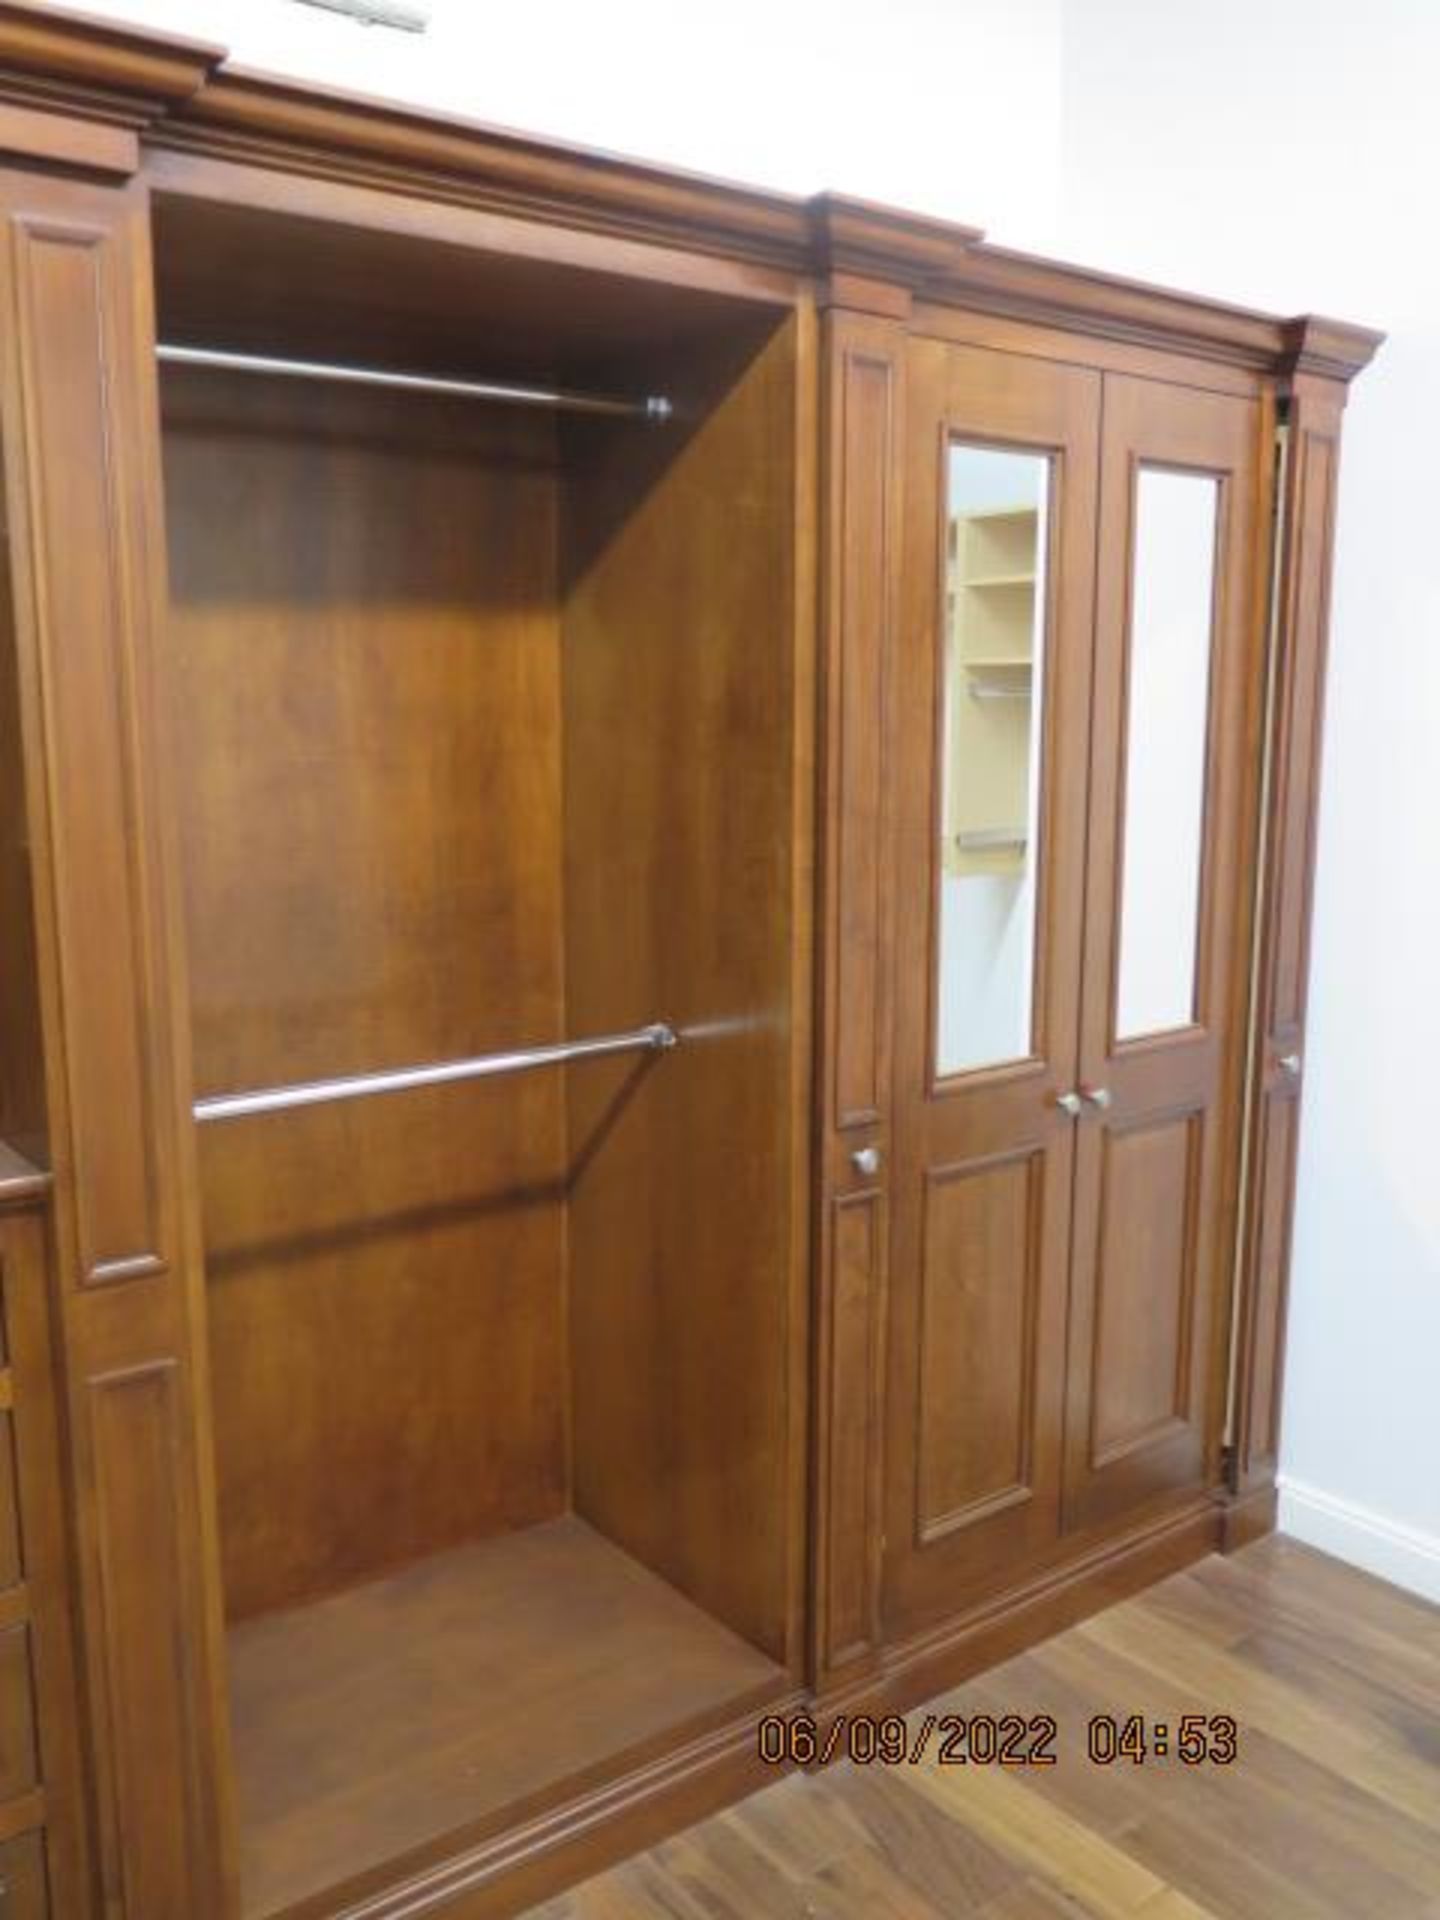 Bedroom or Closet Storage (NO Chairs or Display pieces - Owner will help to dismantle), SOLD AS IS - Image 4 of 7